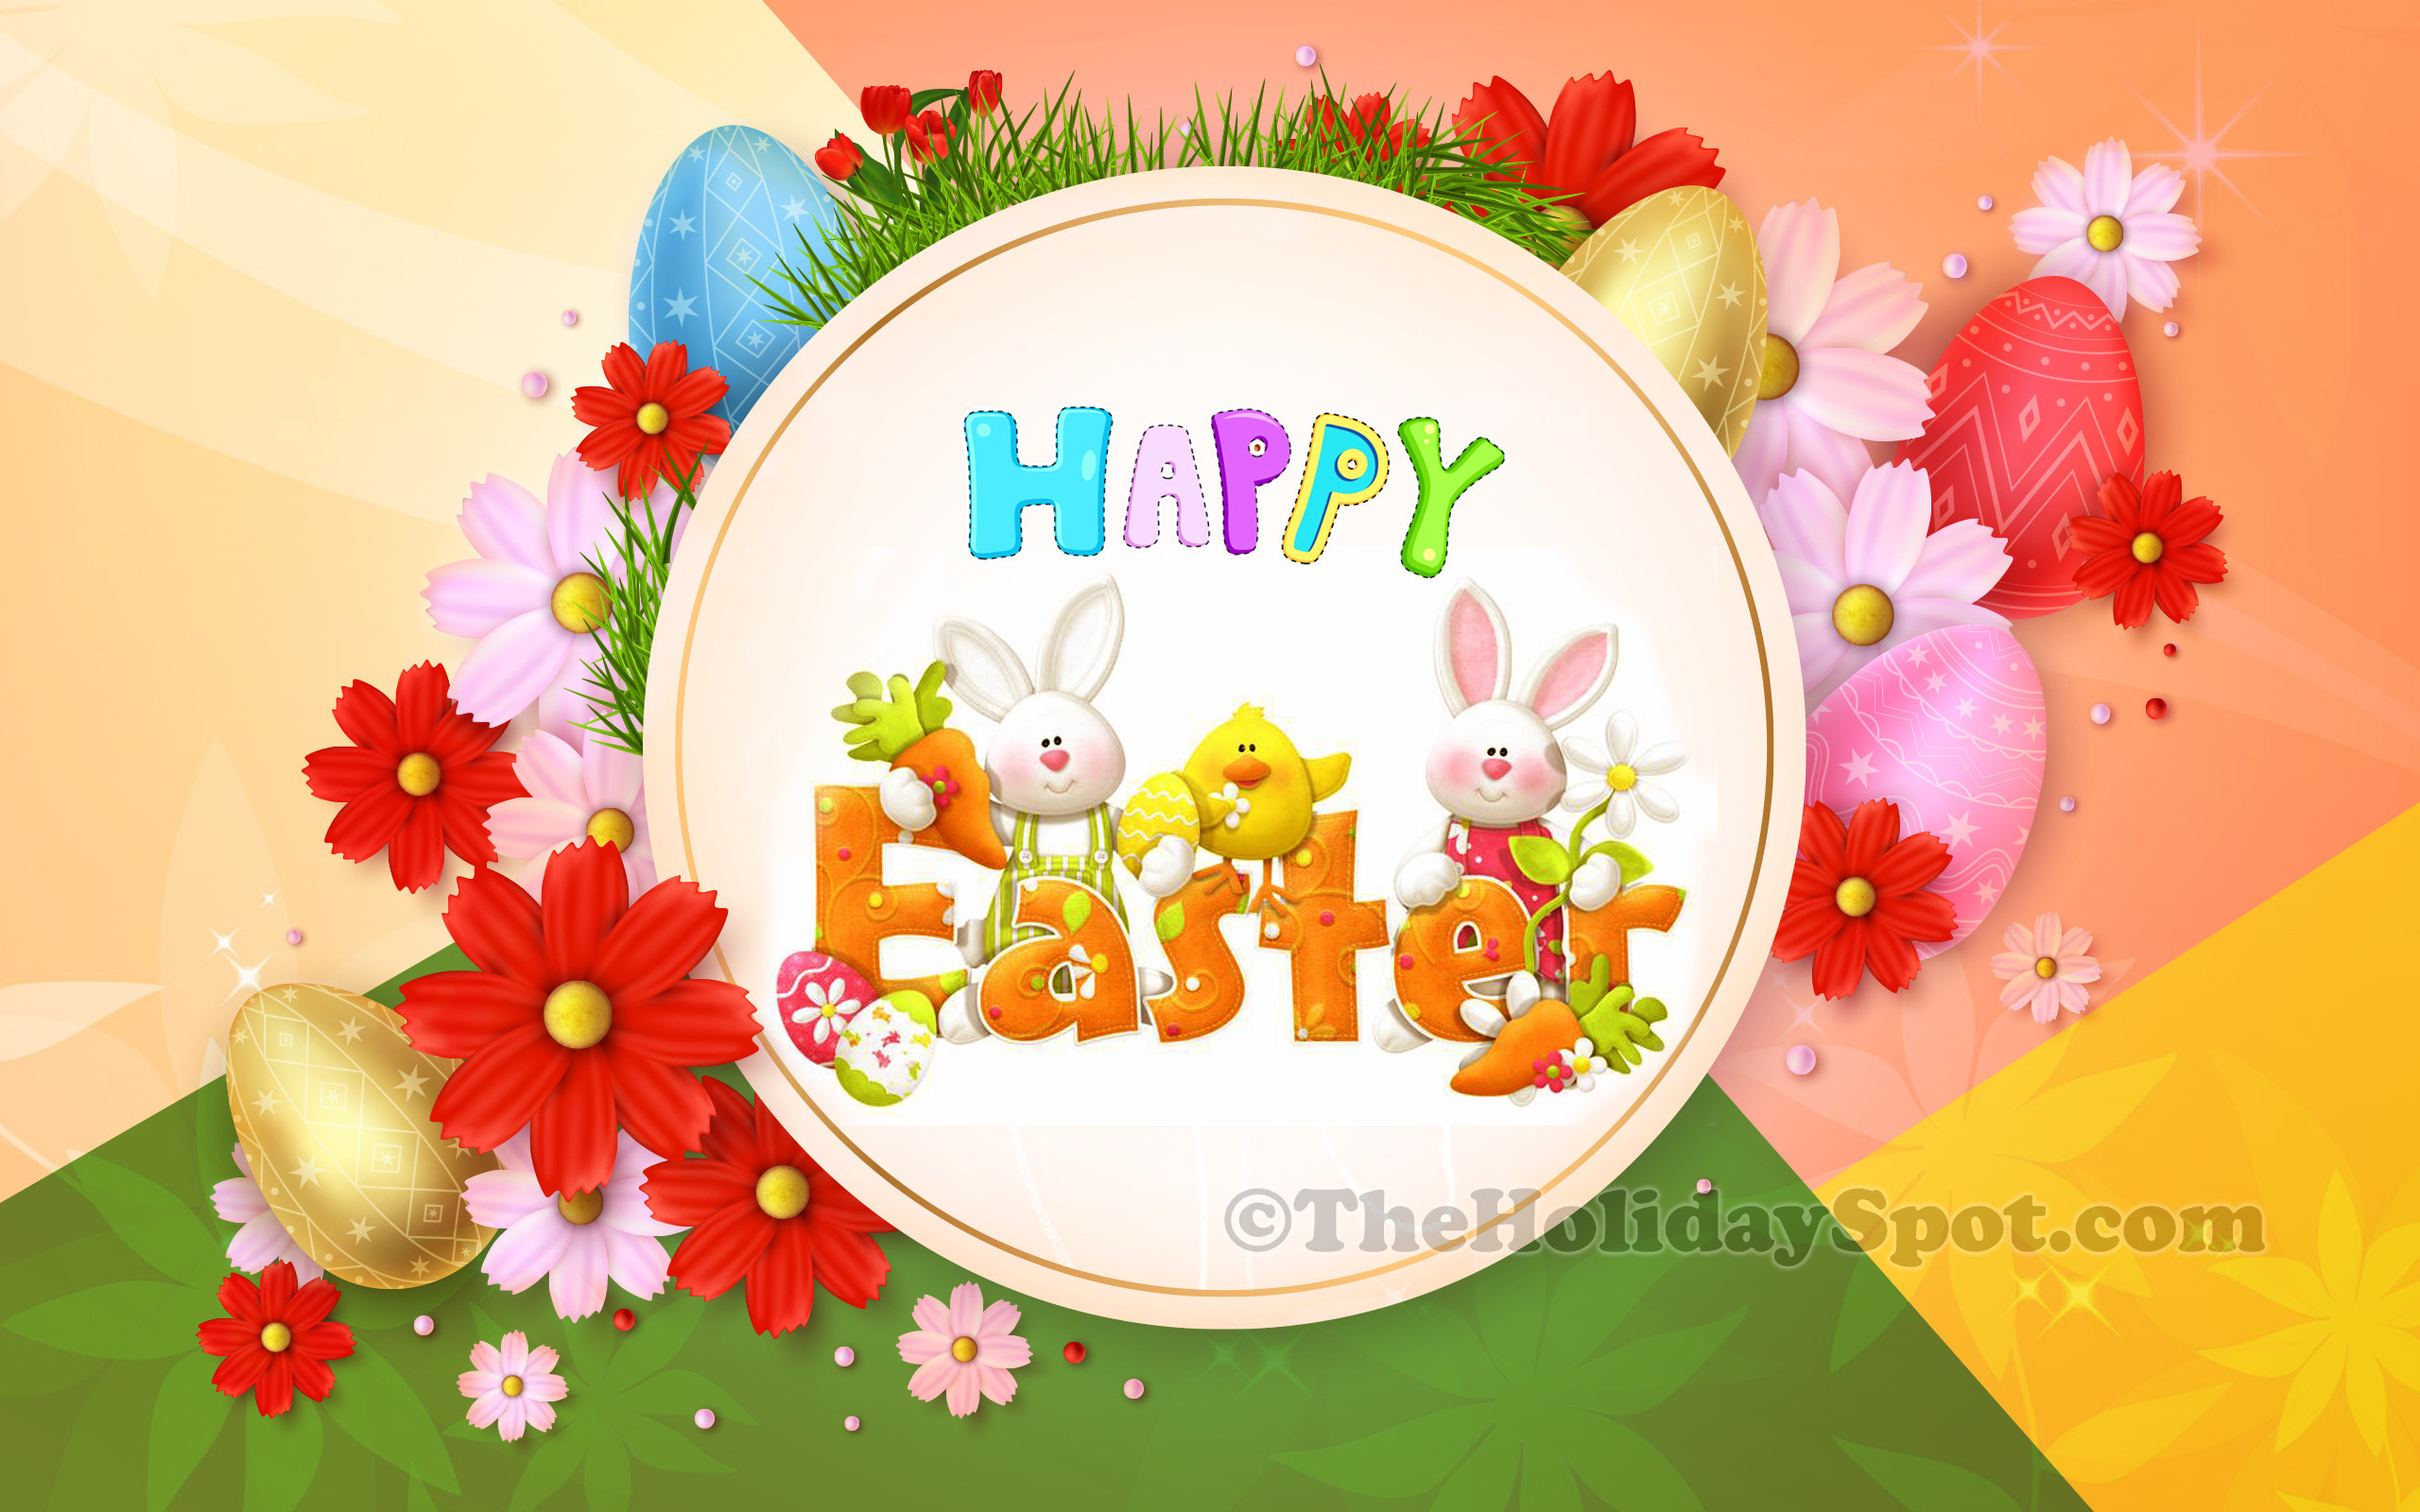 2560x1600 Cute Happy Easter wishes from Bunnies and a chik